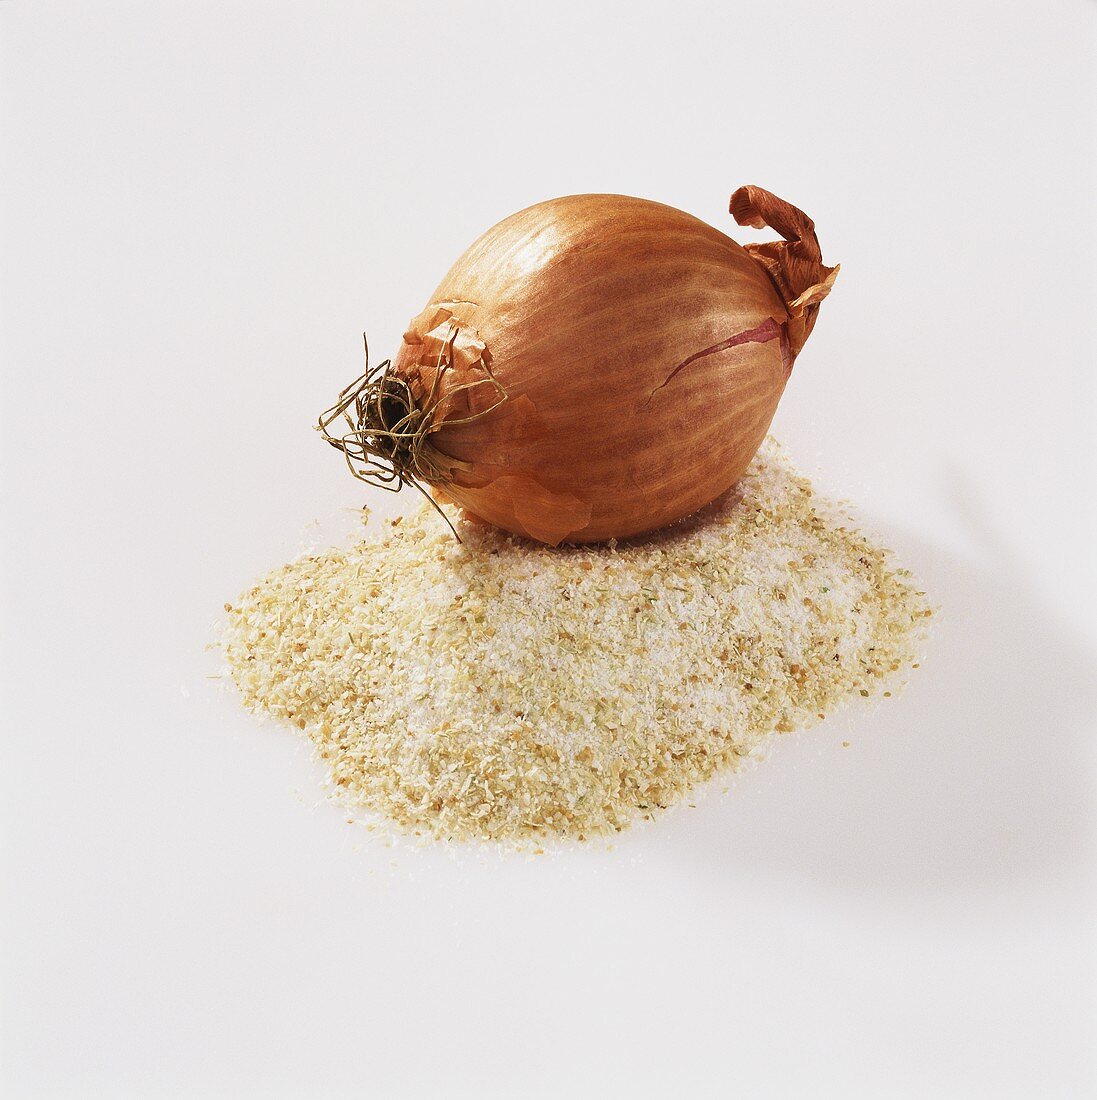 Brown onions and onion powder